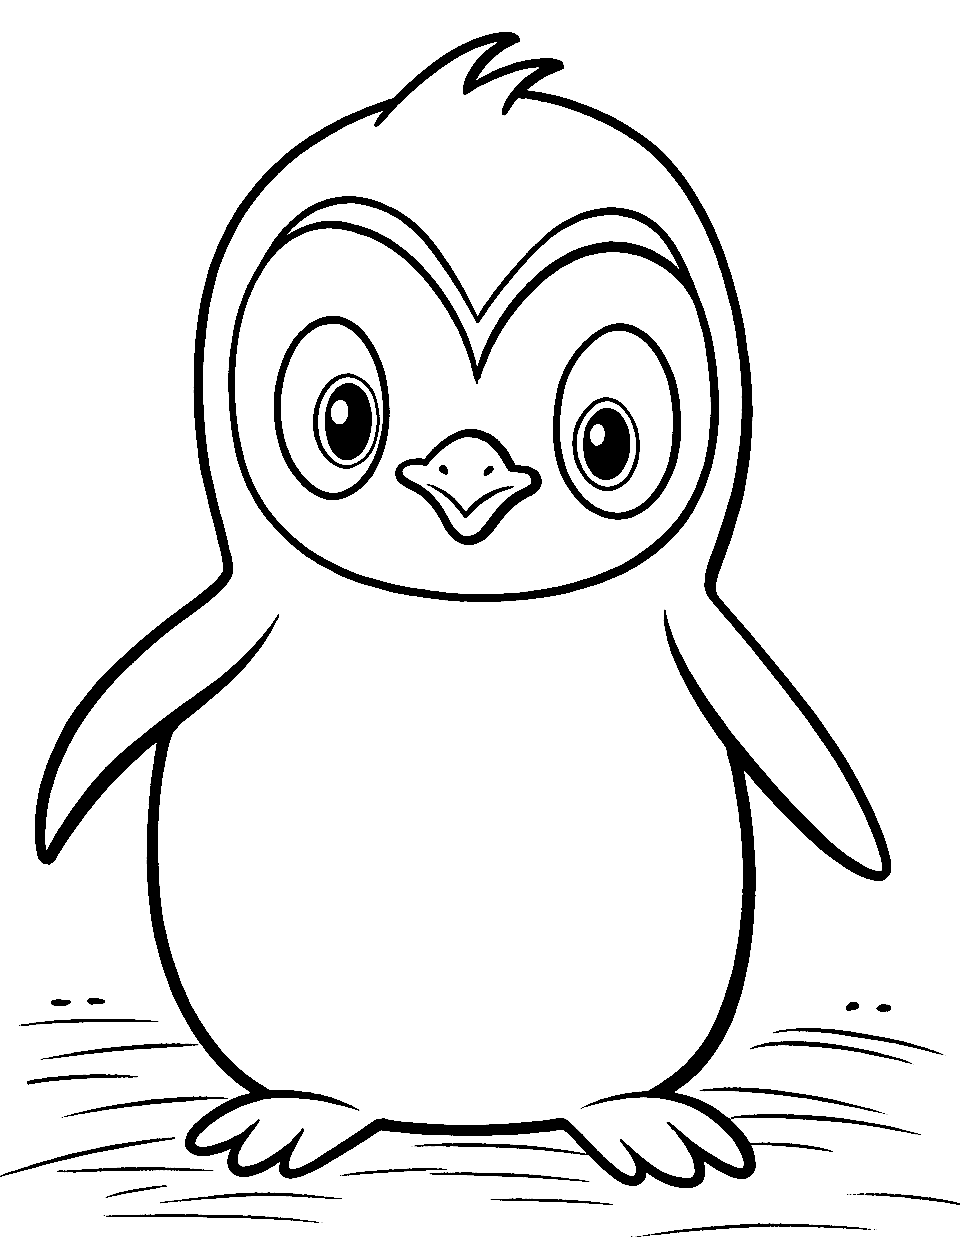 Easy Penguin Sketch Coloring Page - A simple penguin outline, perfect for beginners.